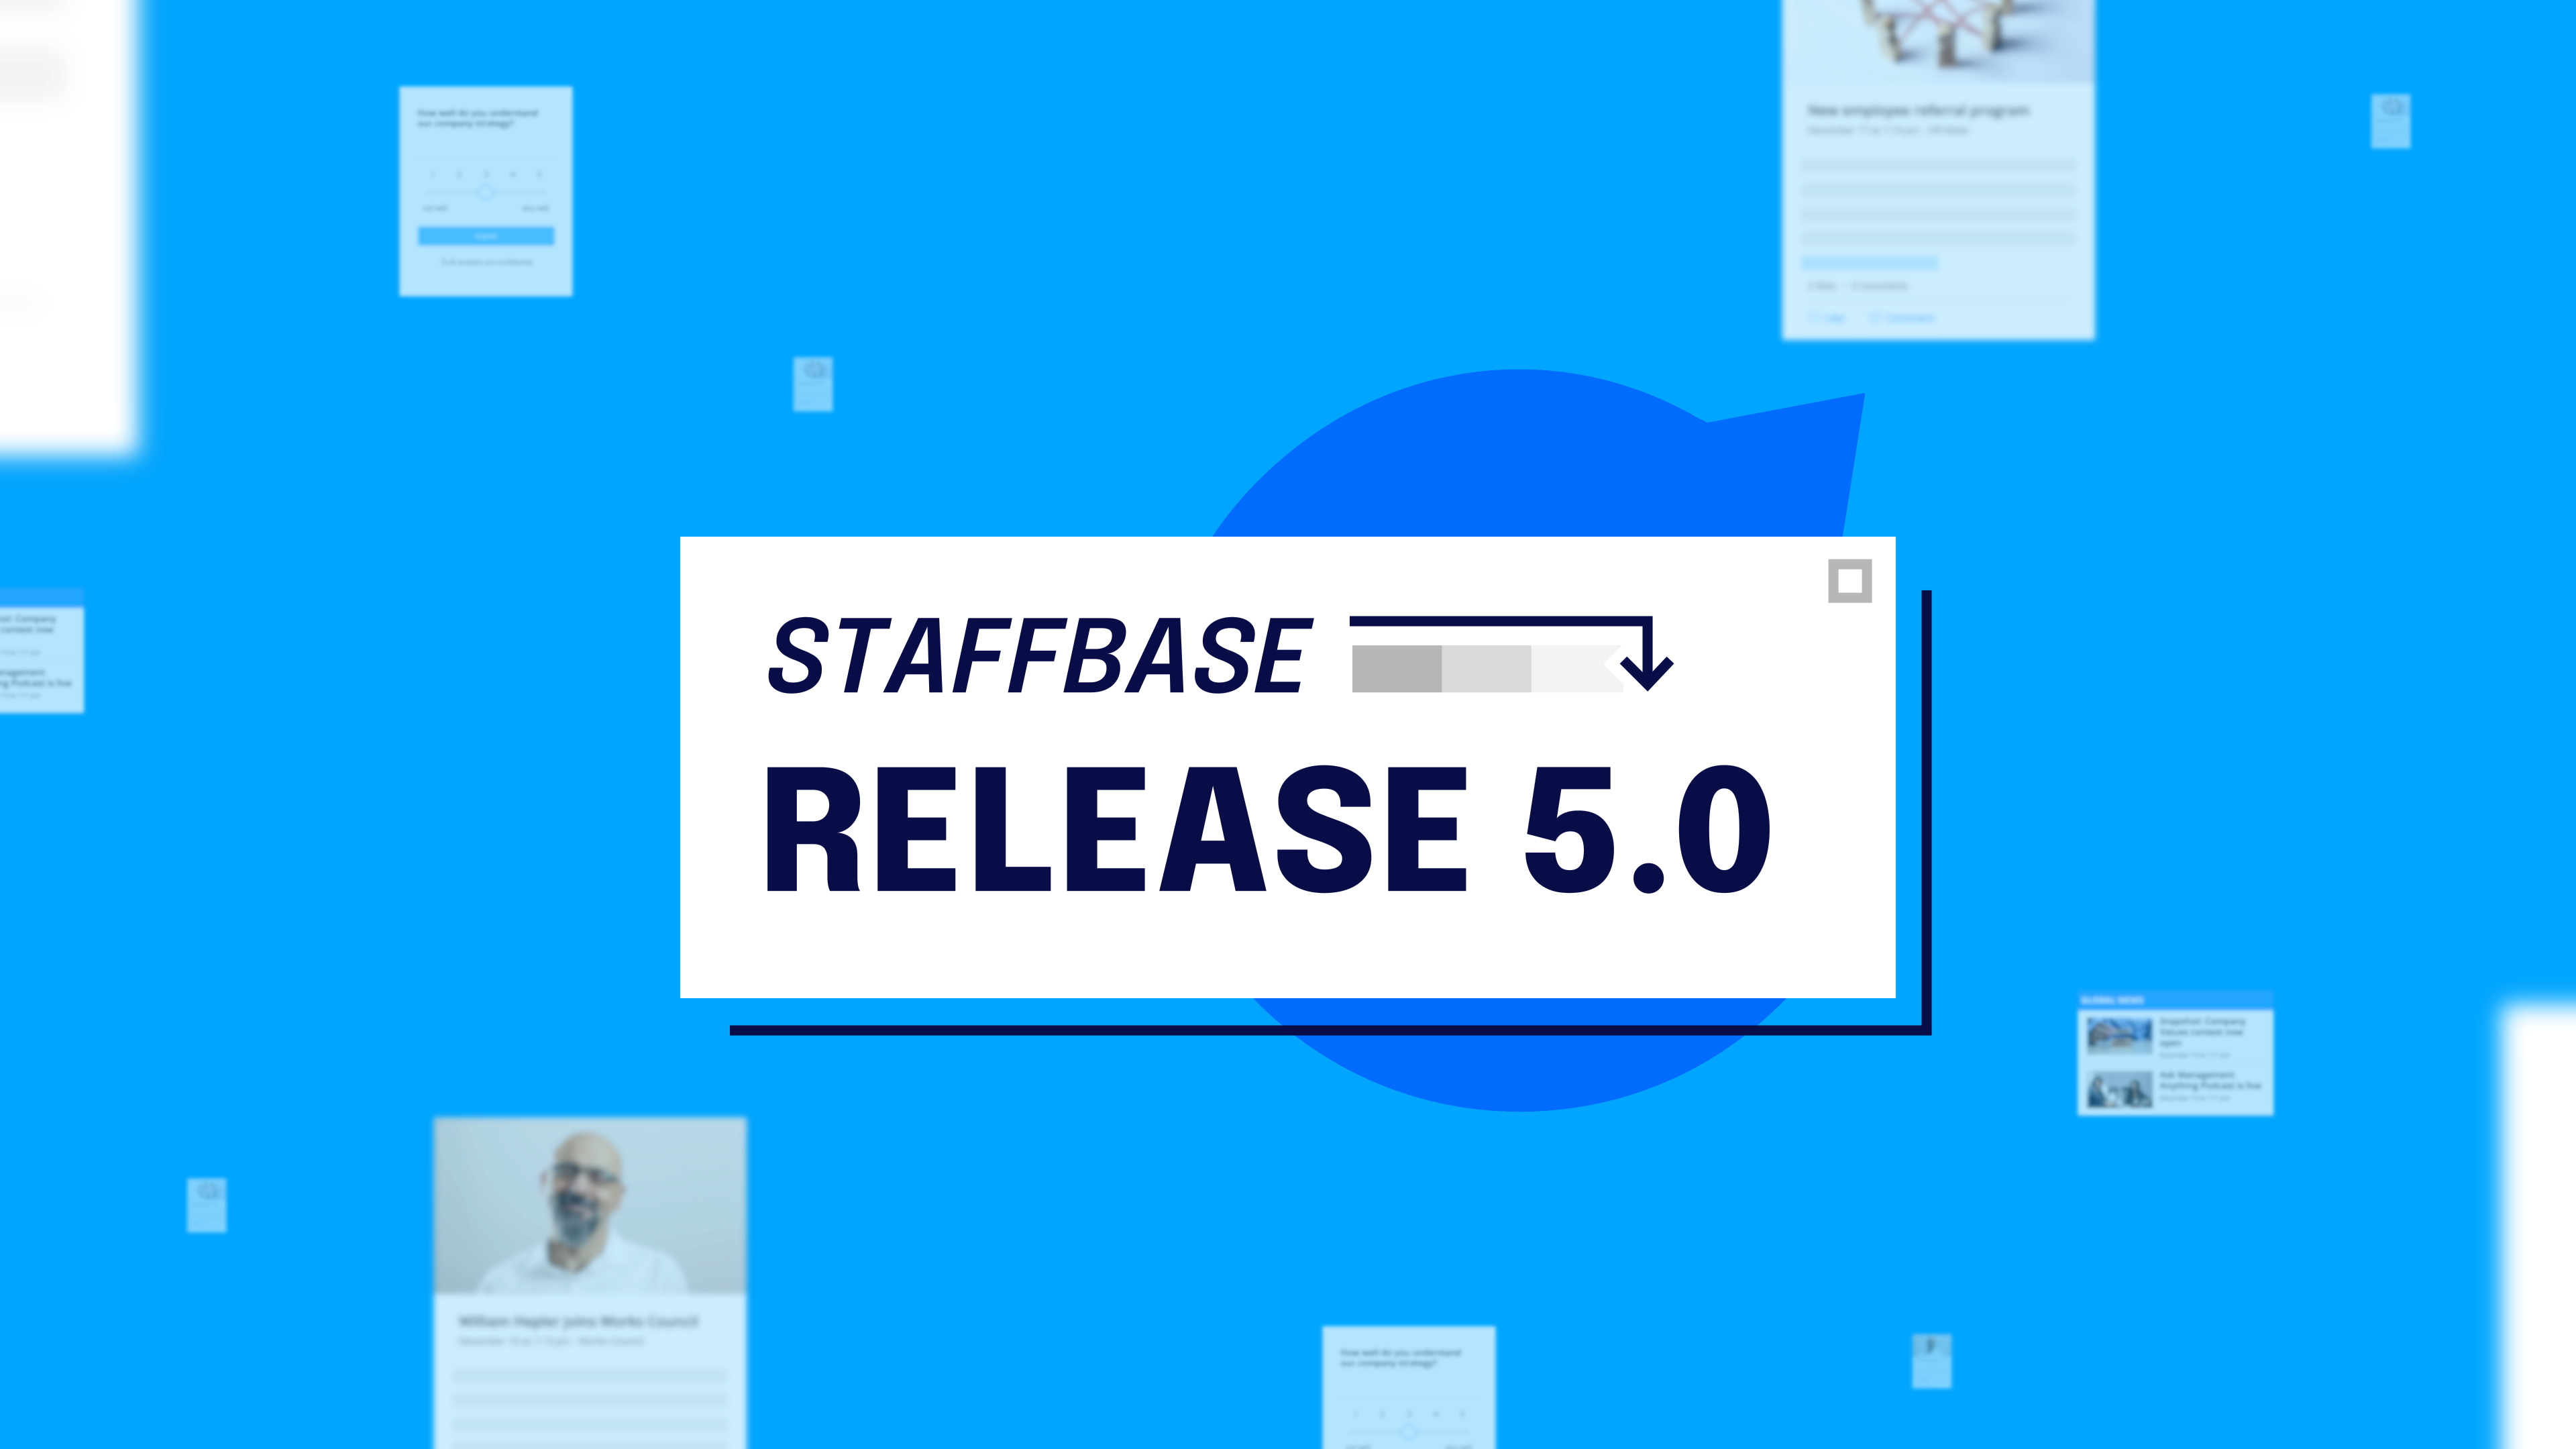 Release 5.0